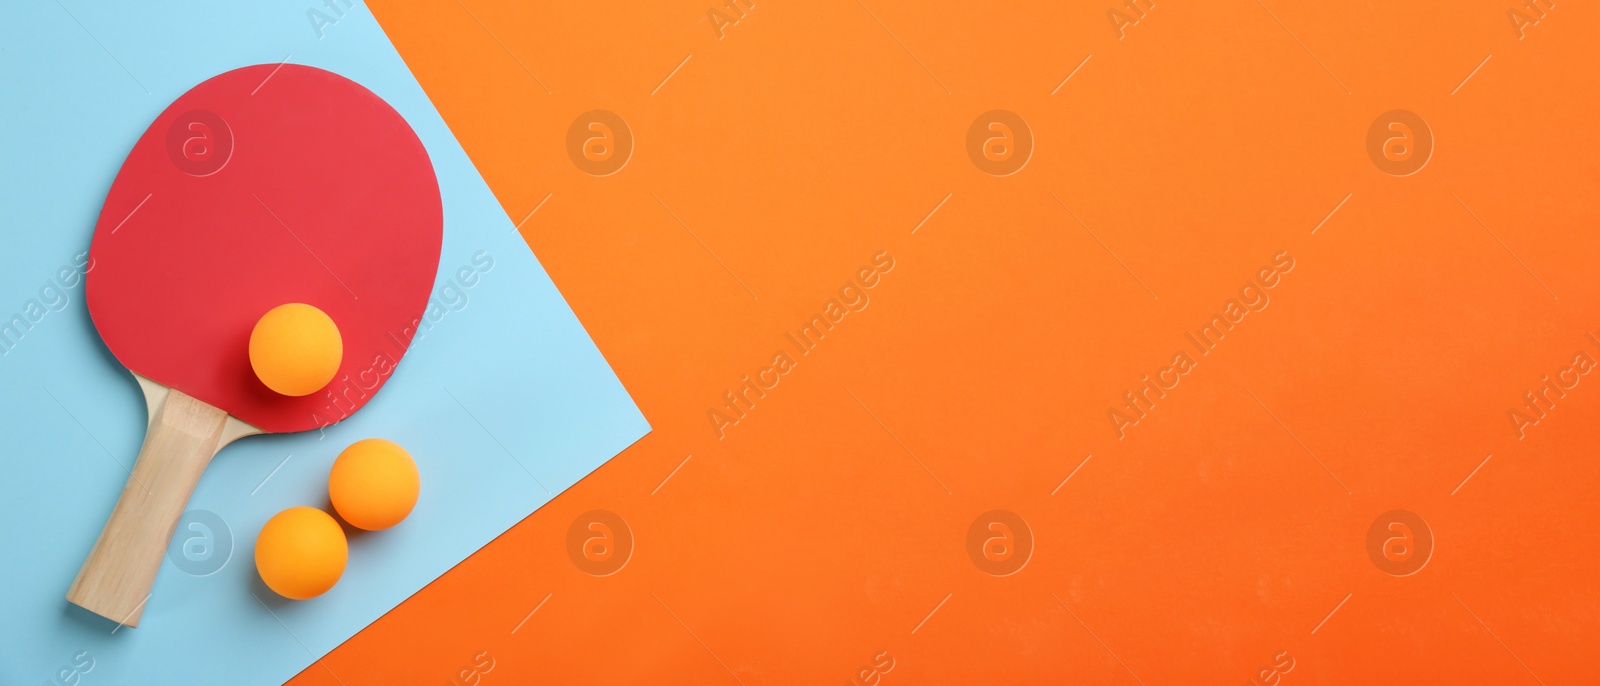 Image of Ping pong racket and balls on color background, flat lay. Space for text. Banner design